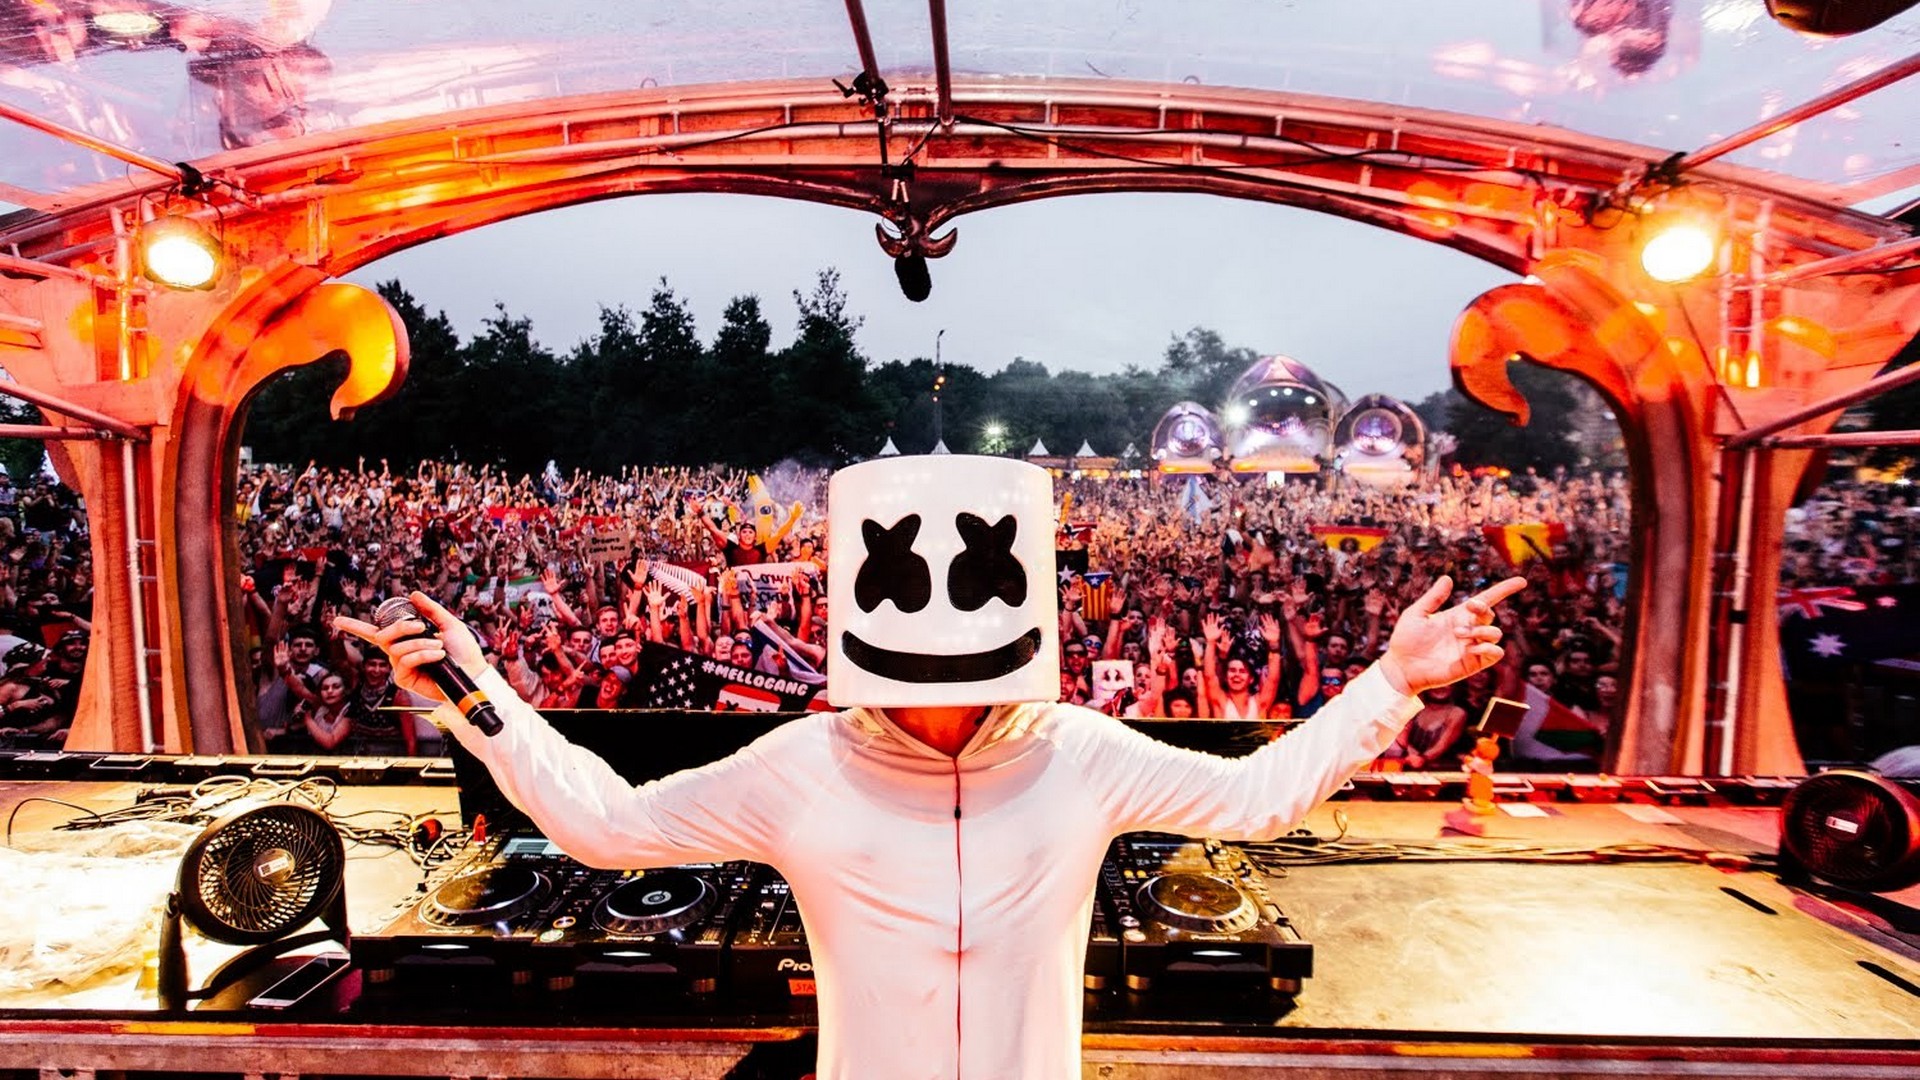 Best Marshmello Wallpaper With high-resolution 1920X1080 pixel. You can use this wallpaper for your Windows and Mac OS computers as well as your Android and iPhone smartphones